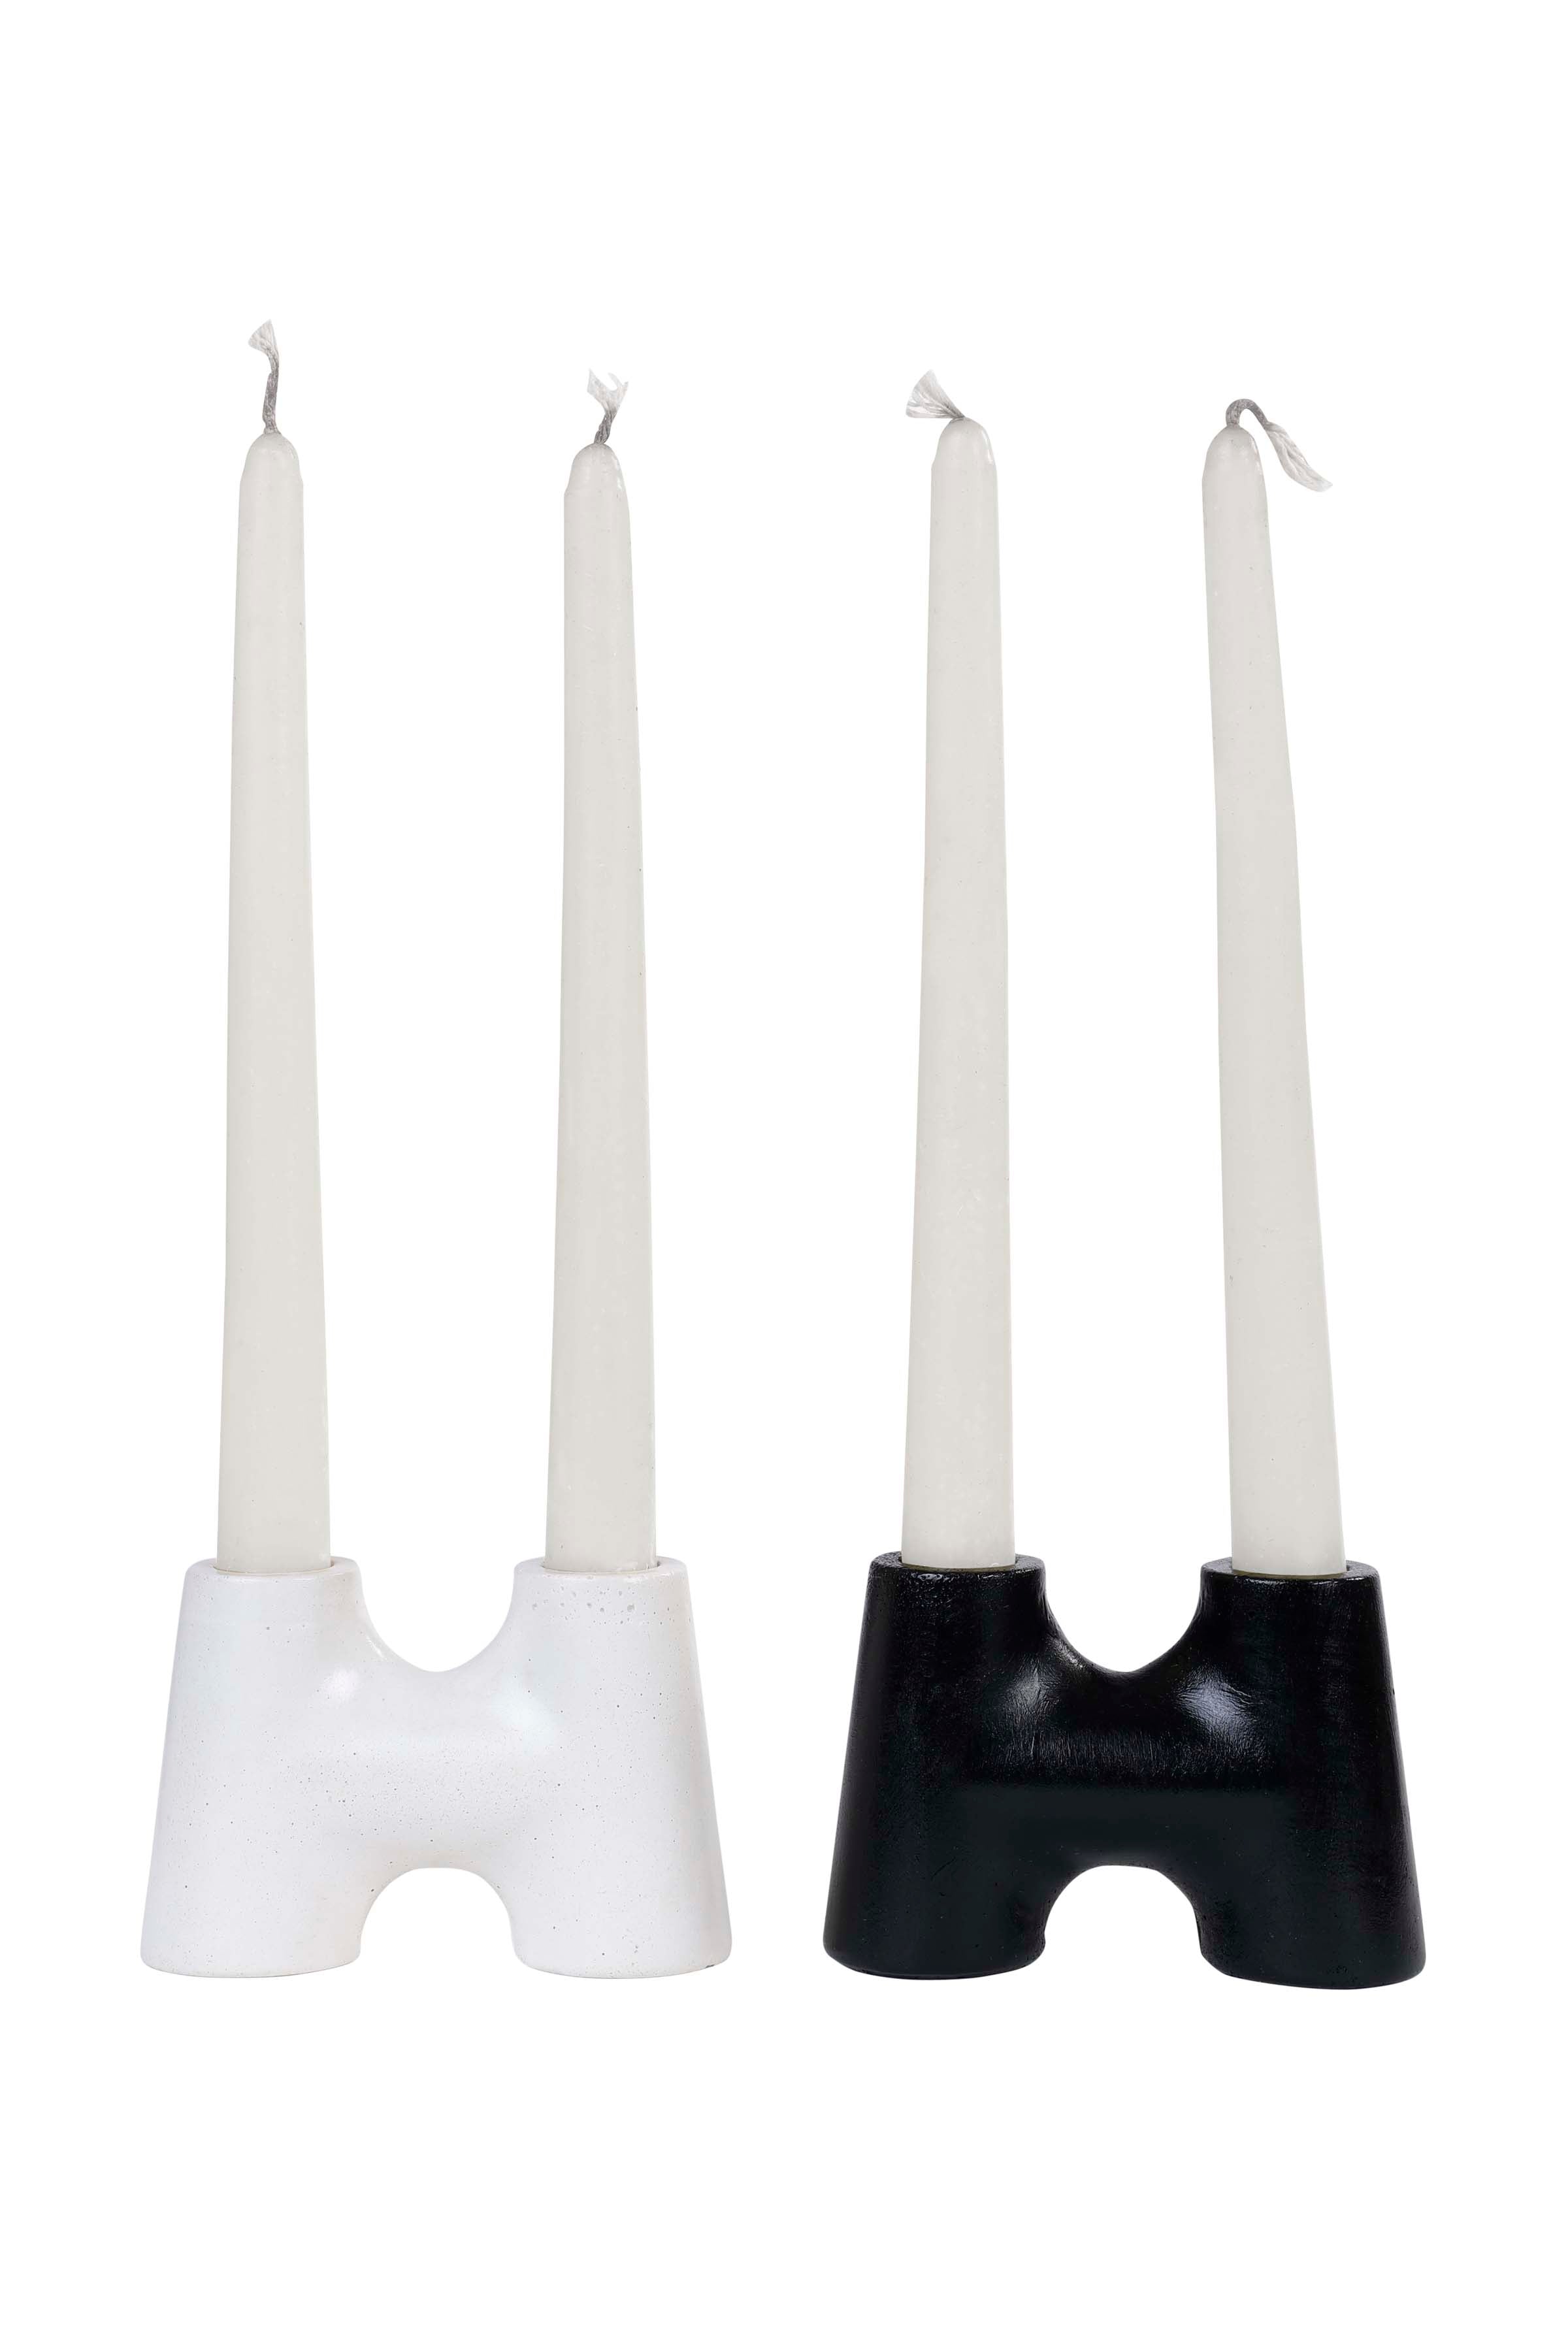 "H" Style  Nordic Concrete Candle Holder - Black (Set of 2)